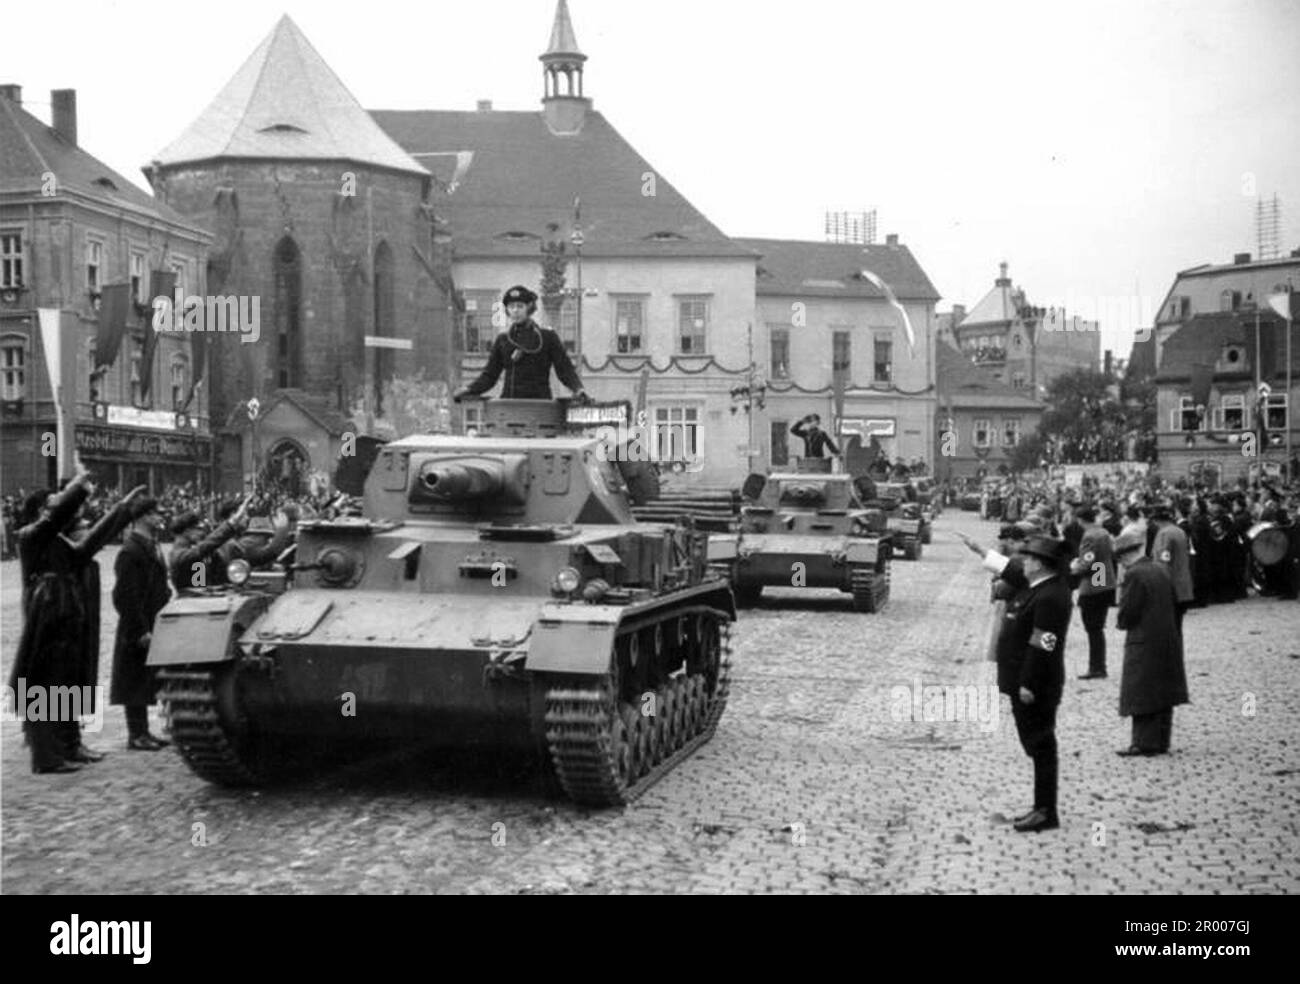 Heavy German tanks driving past General Reinhardt in Adolf Hitler Platz, Komotau (today Chomutov)  in Czechoslovakia after the annexation of the Sudetenland. After the annexation of Austria, Hitler demanded that he be given the Sudeten region of Czechoslovakia. At the Munich conference in September 1938 the Western powers agreed to this and the nazis occupied the area. Not long after Hitler broke his promise and invaded the rest of Czechoslovakia before turning his attention to Poland. Bundesarchiv, Bild 146-1970-050-41 / CC-BY-SA 3.0 Stock Photo